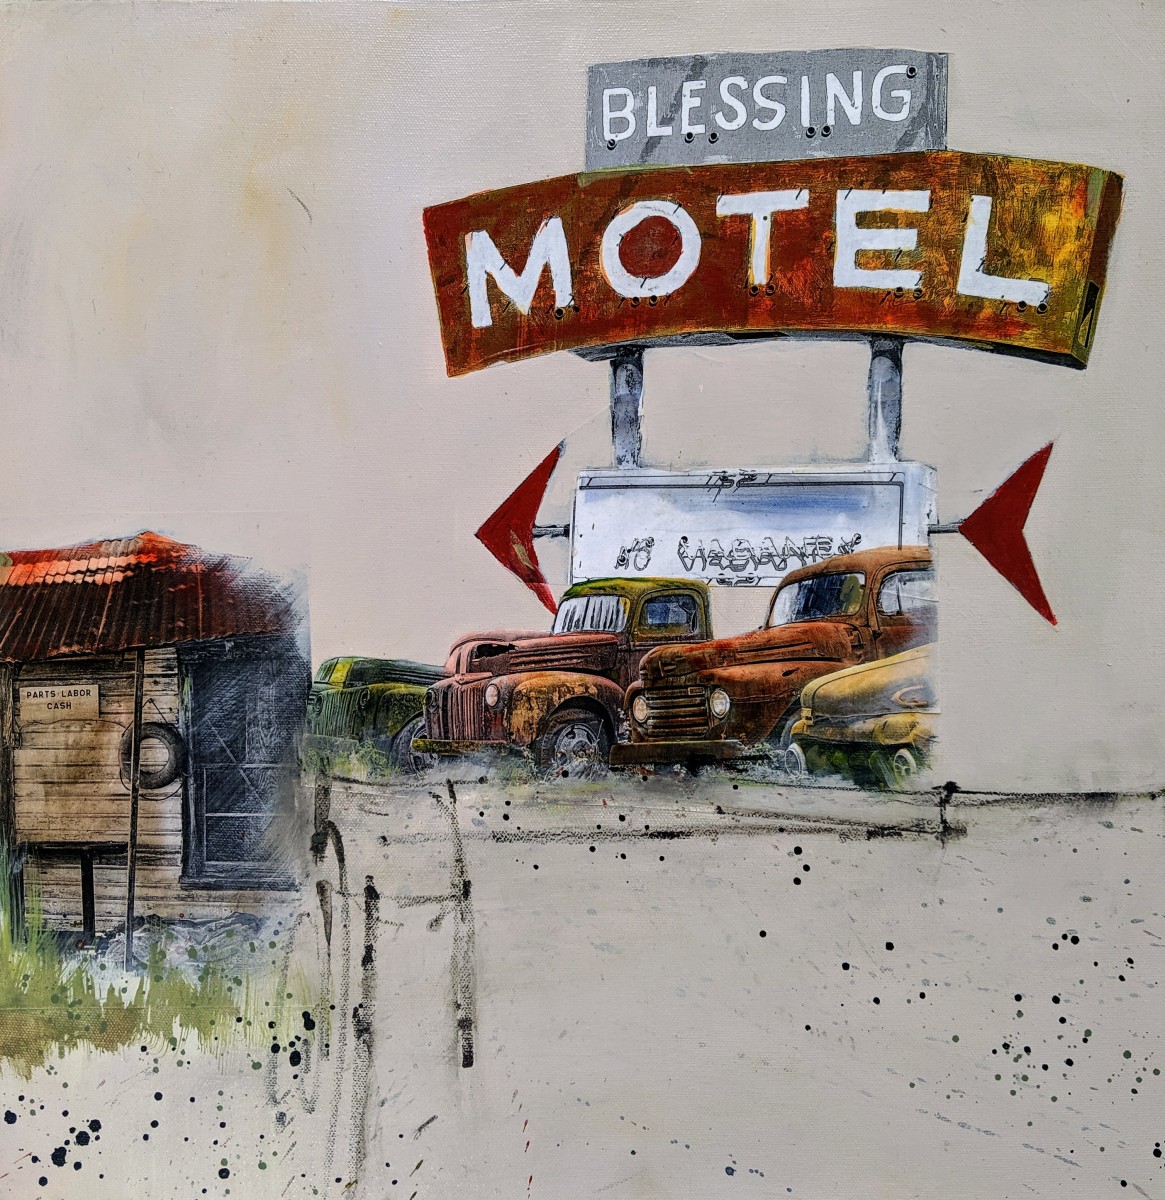 Blessing Motel by Rene Griffith 